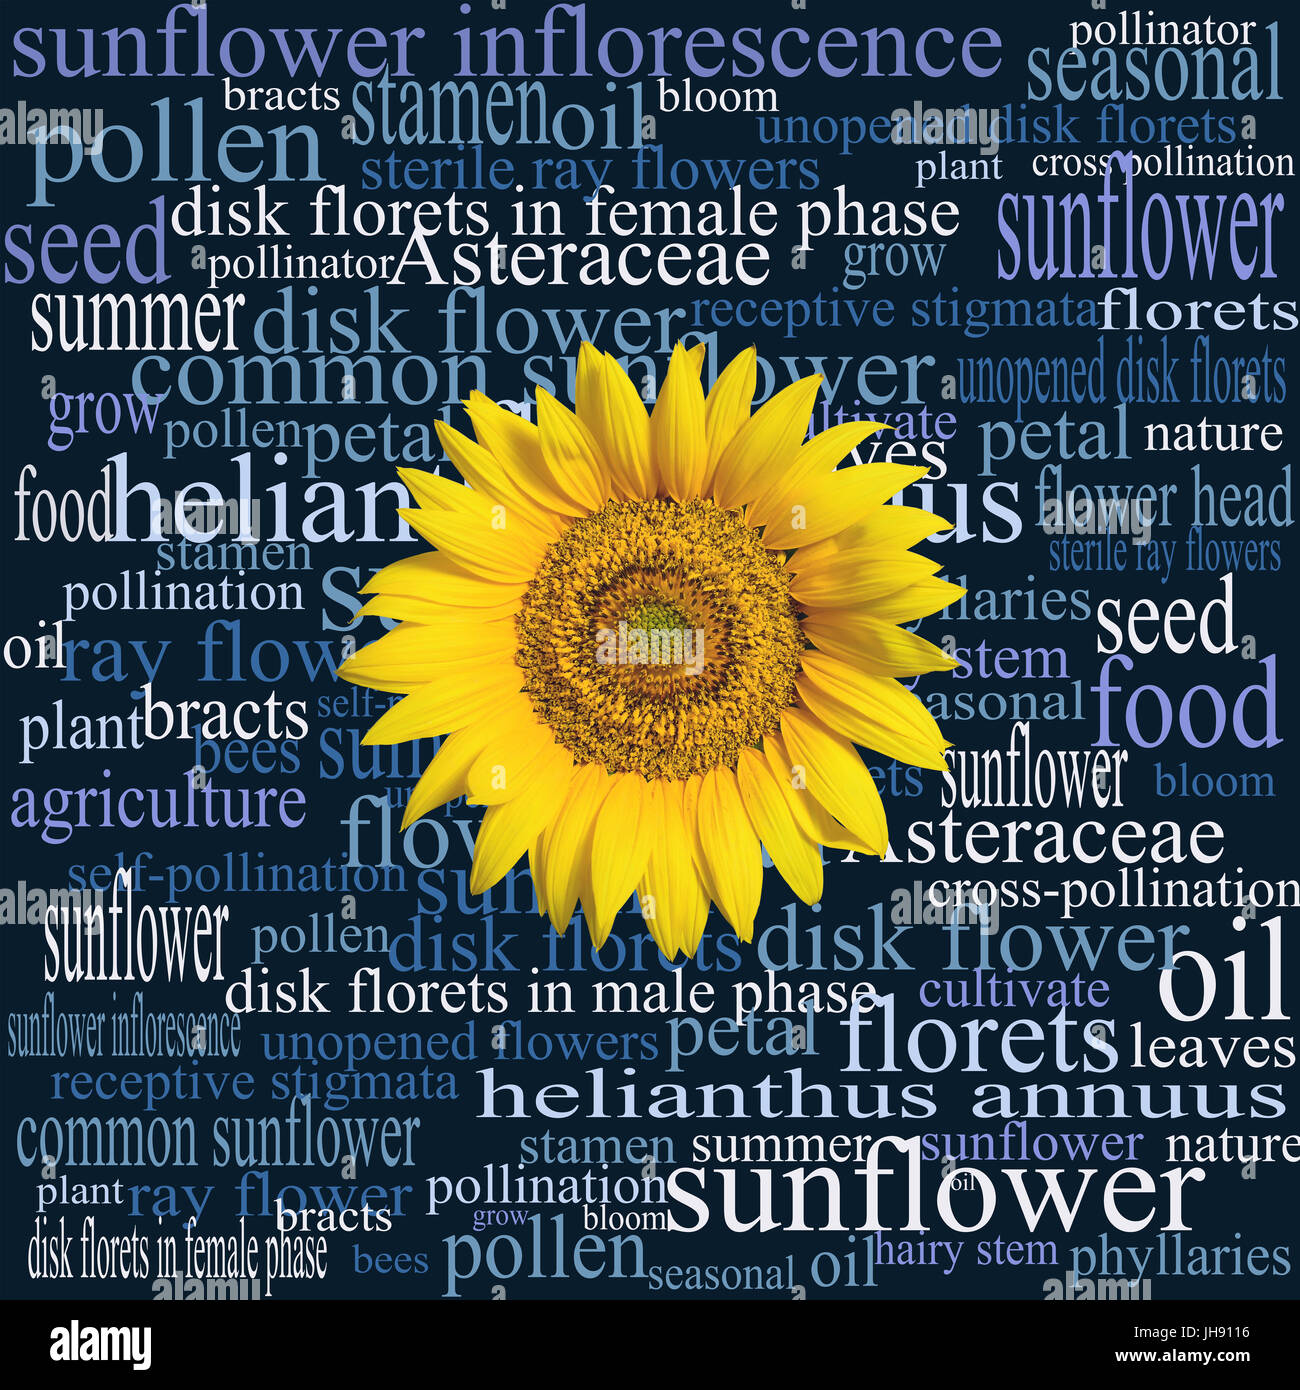 Sunflower head on a word cloud full of botanical terms and syntagmas relating to that particular part, and to the common sunflower in general. Stock Photo